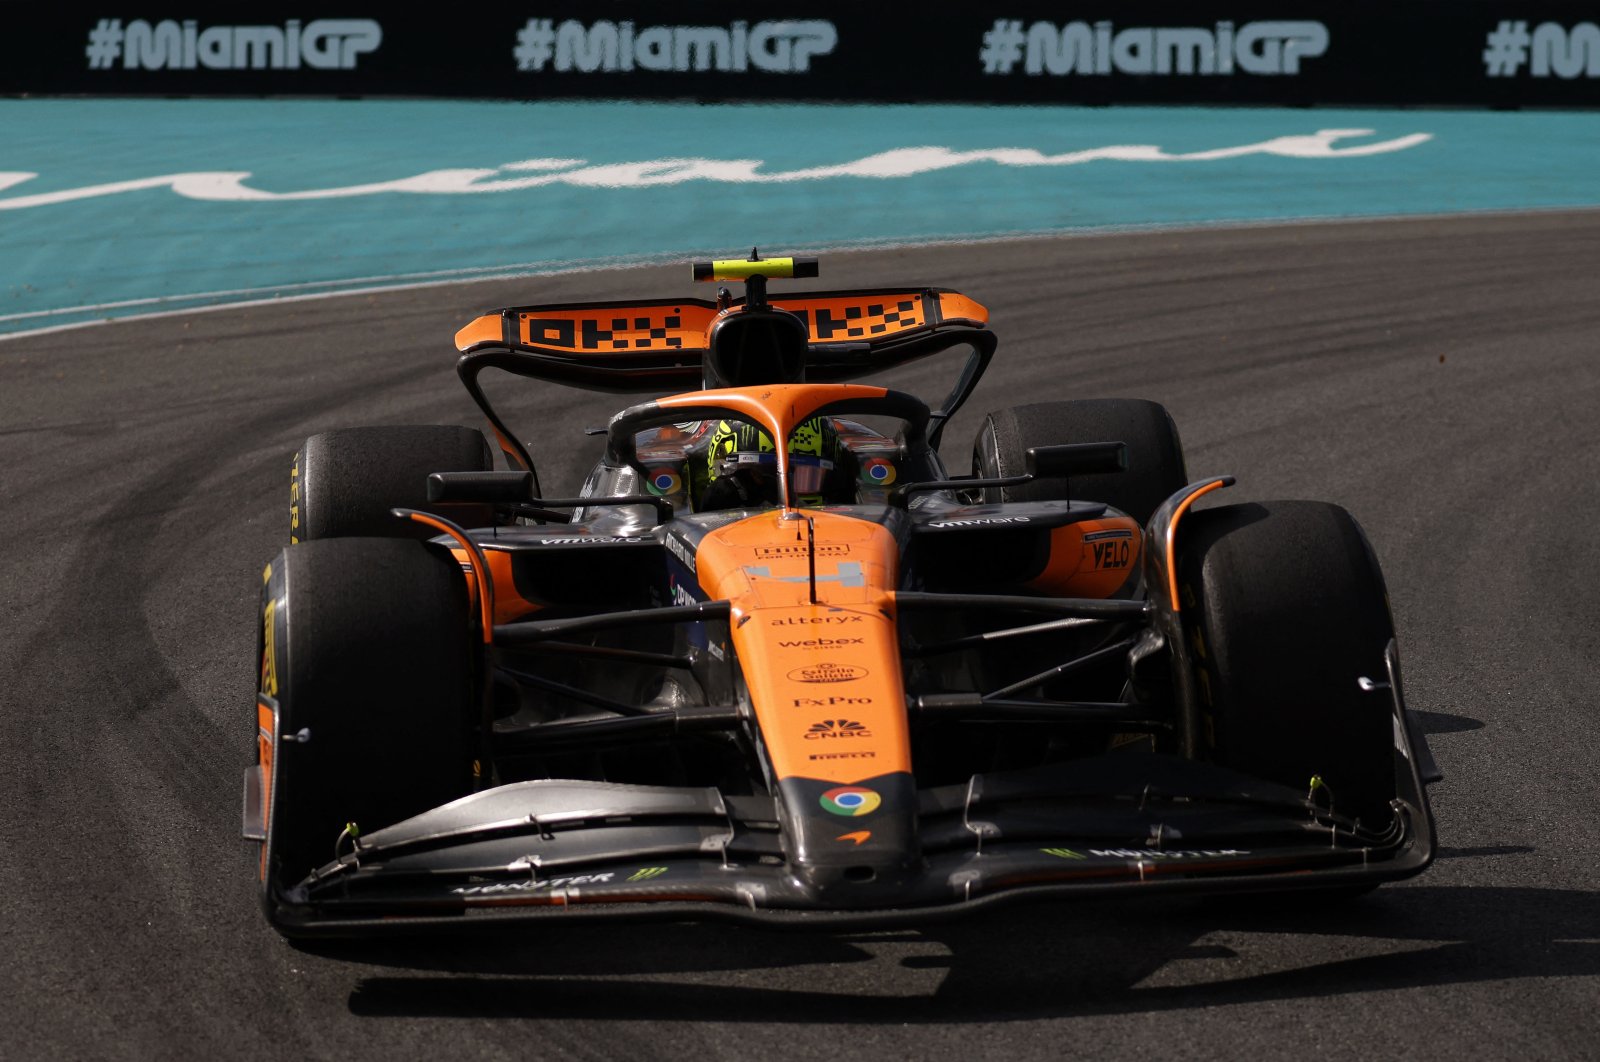 Norris drives McLaren’s confidence to new heights after GP win